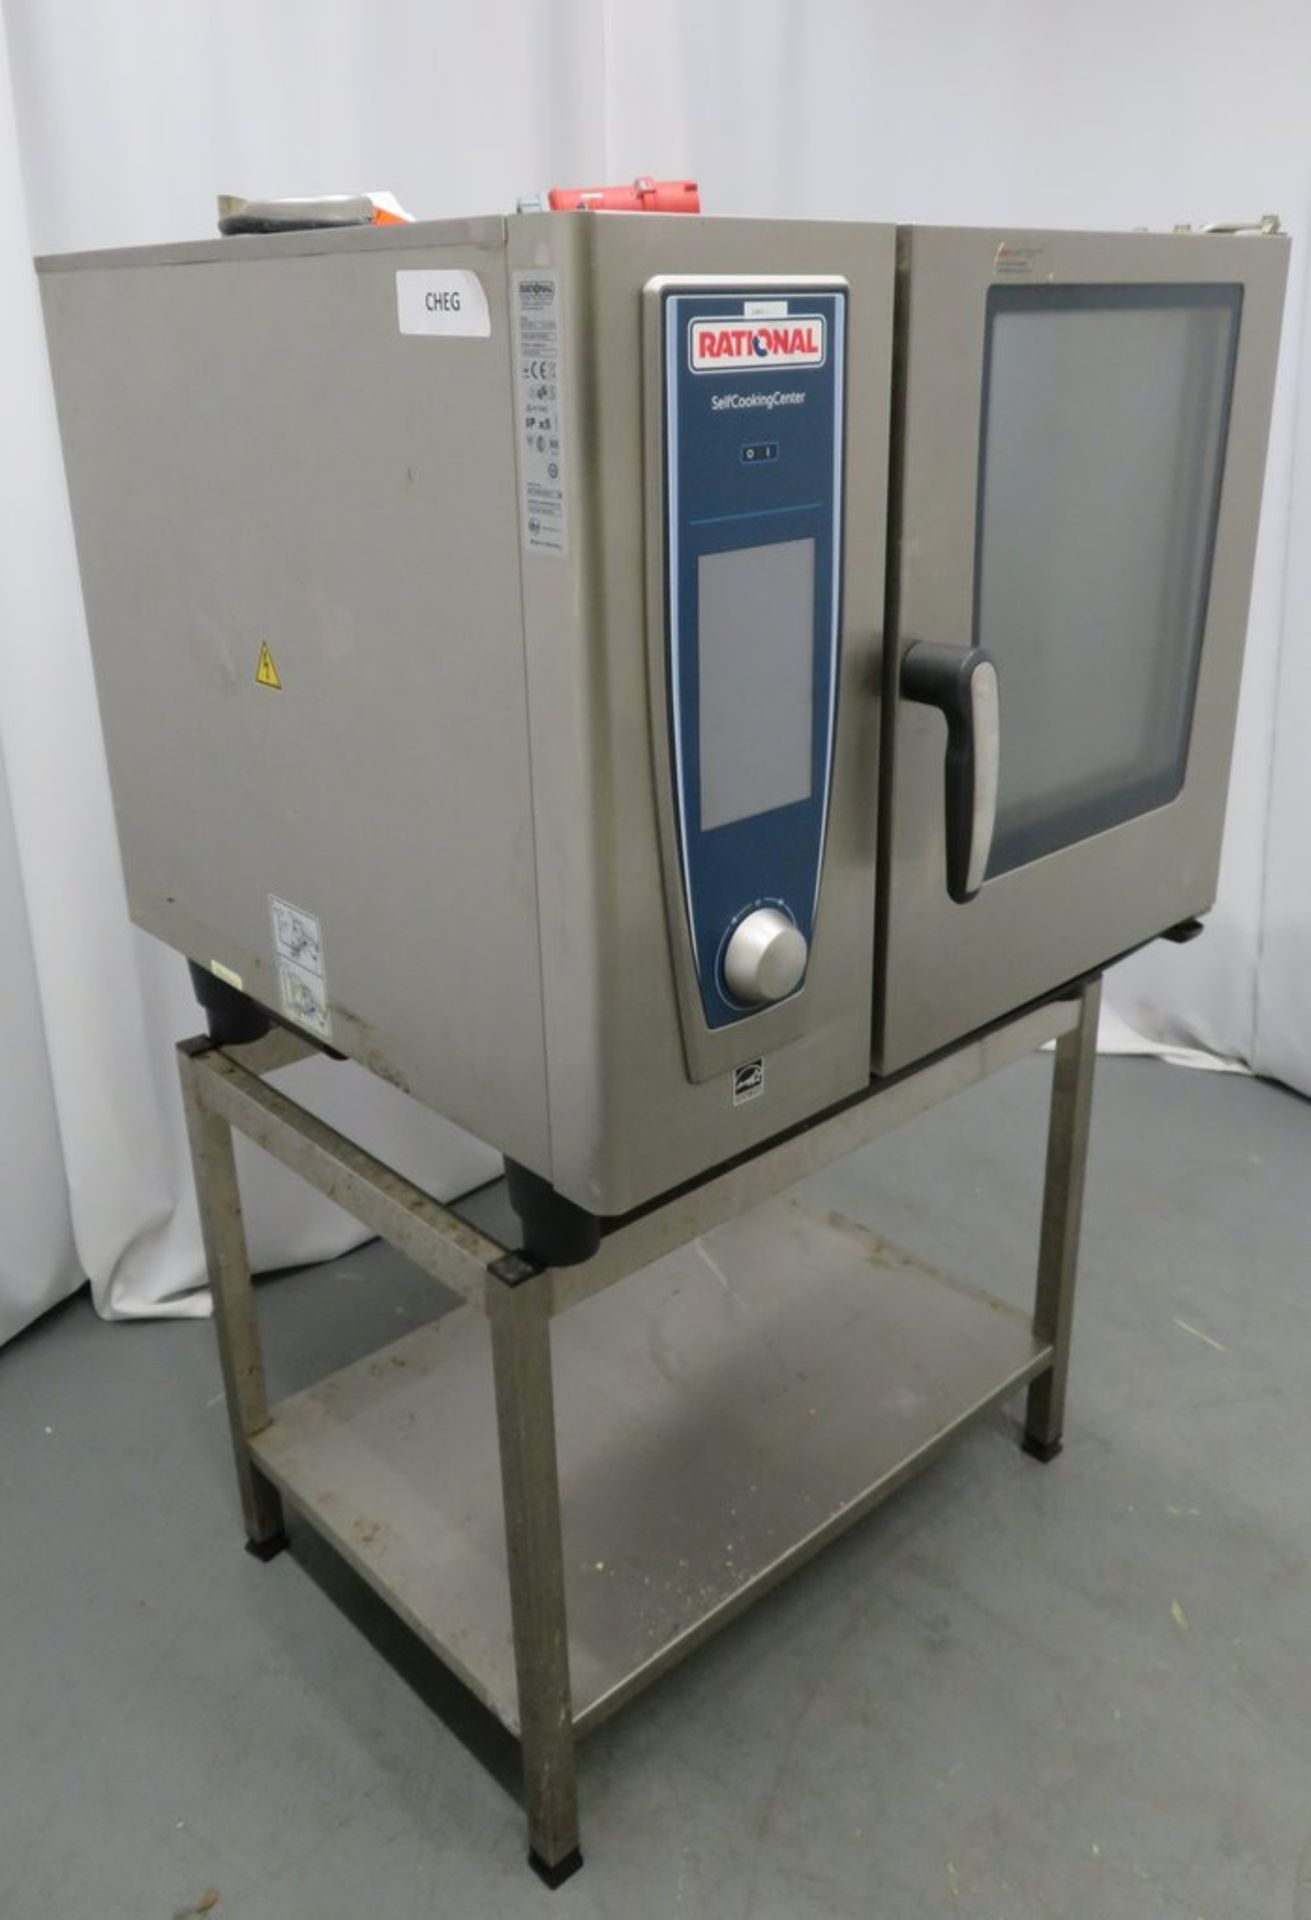 Rational SCC WE 61 6 grid combi oven (2018), 3 phase electric - Image 2 of 8